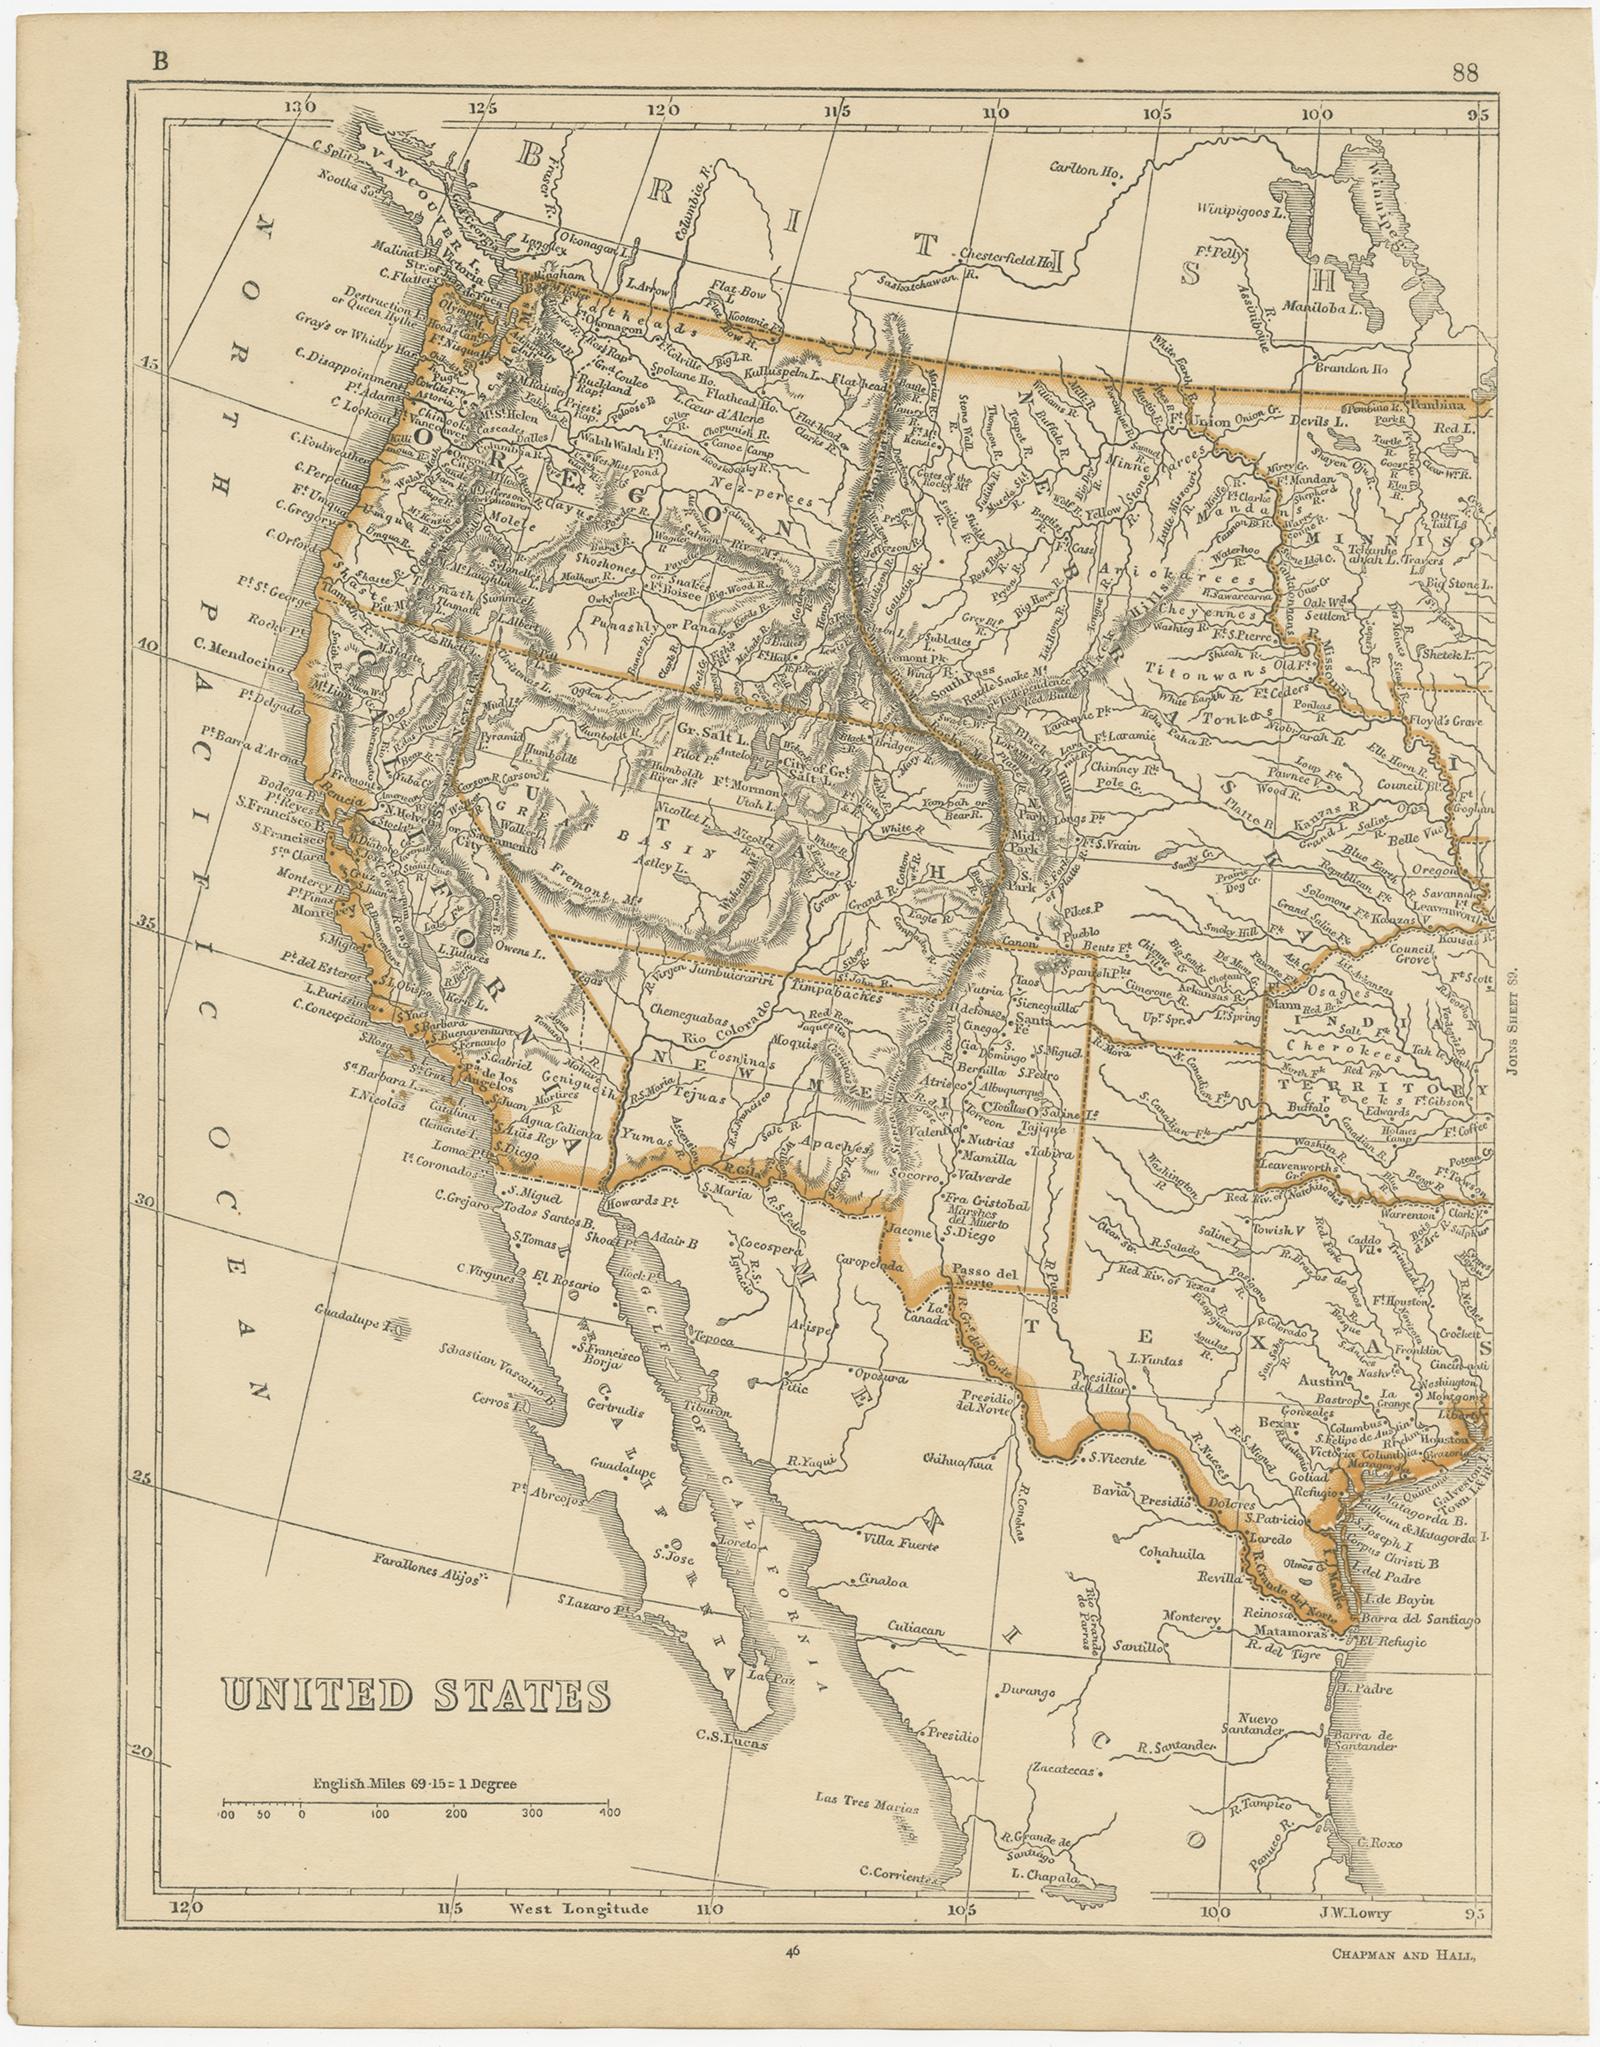 Antique map titled 'United States'. Two individual sheets of the United States. This map originates from 'Lowry's table Atlas constructed and engraved from the most recent authorities' by J.W. Lowry. Published 1852.